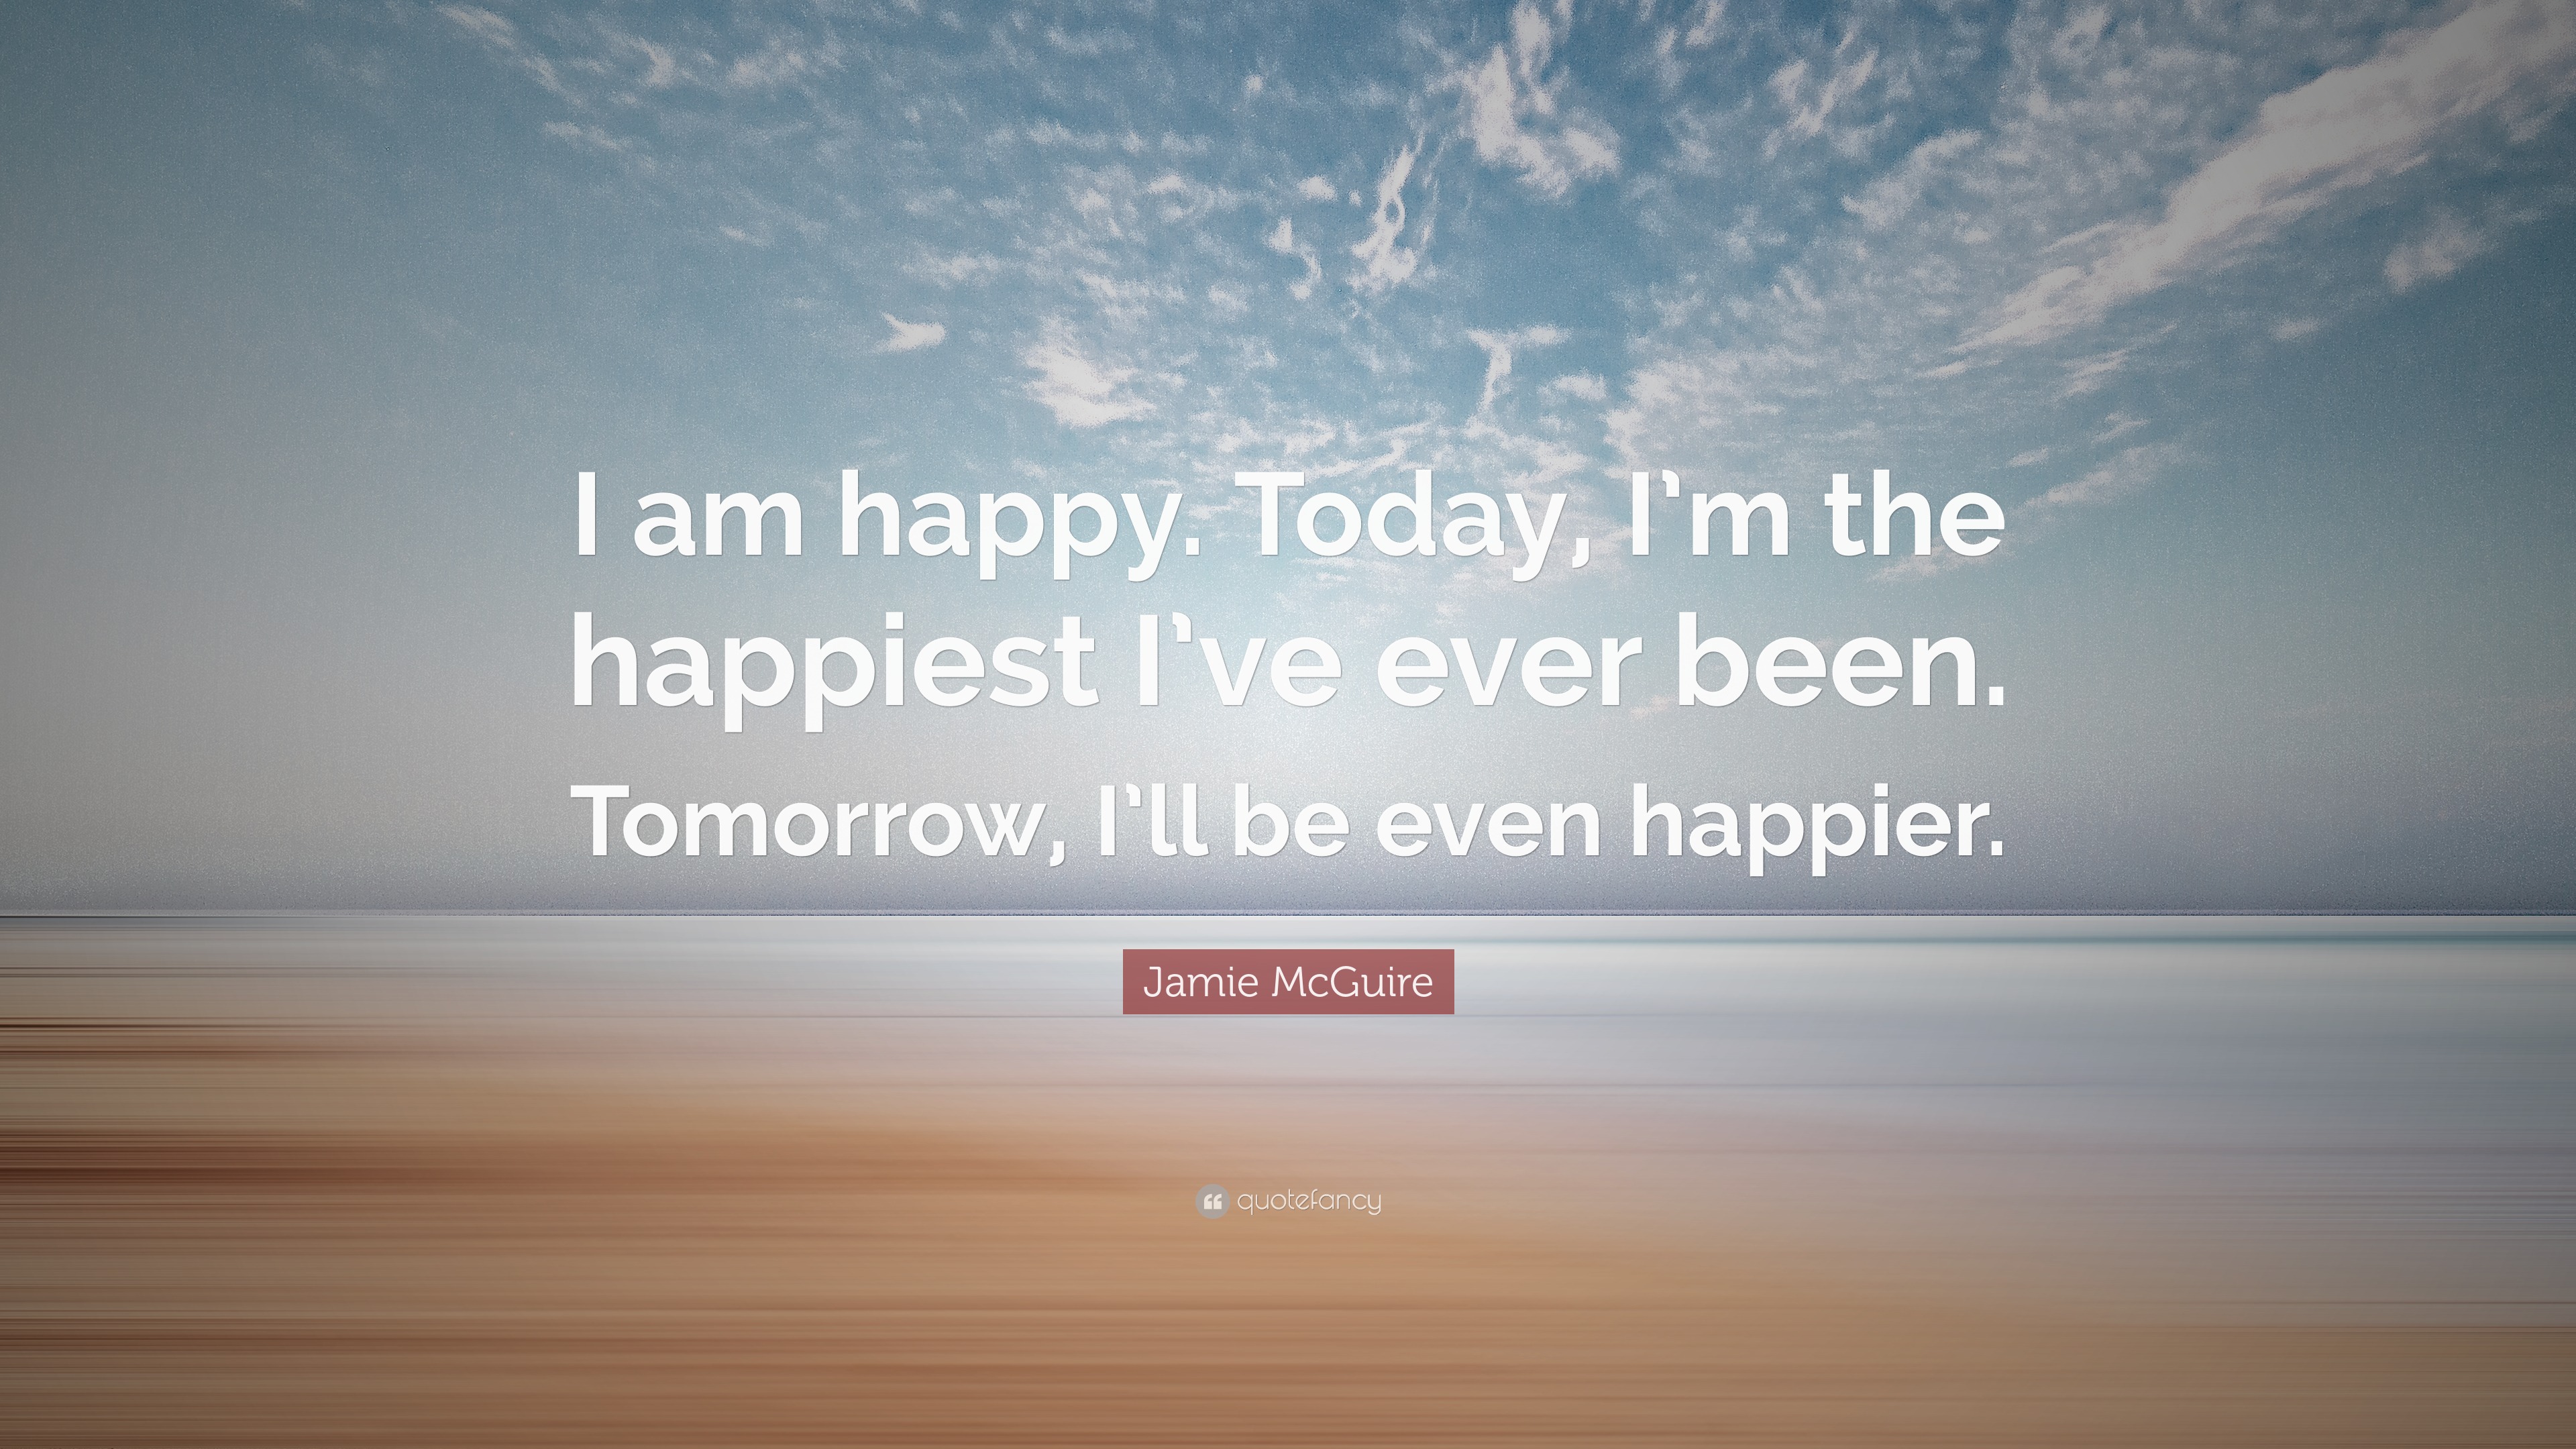 Jamie Mcguire Quote I Am Happy Today I M The Happiest I Ve Ever Been Tomorrow